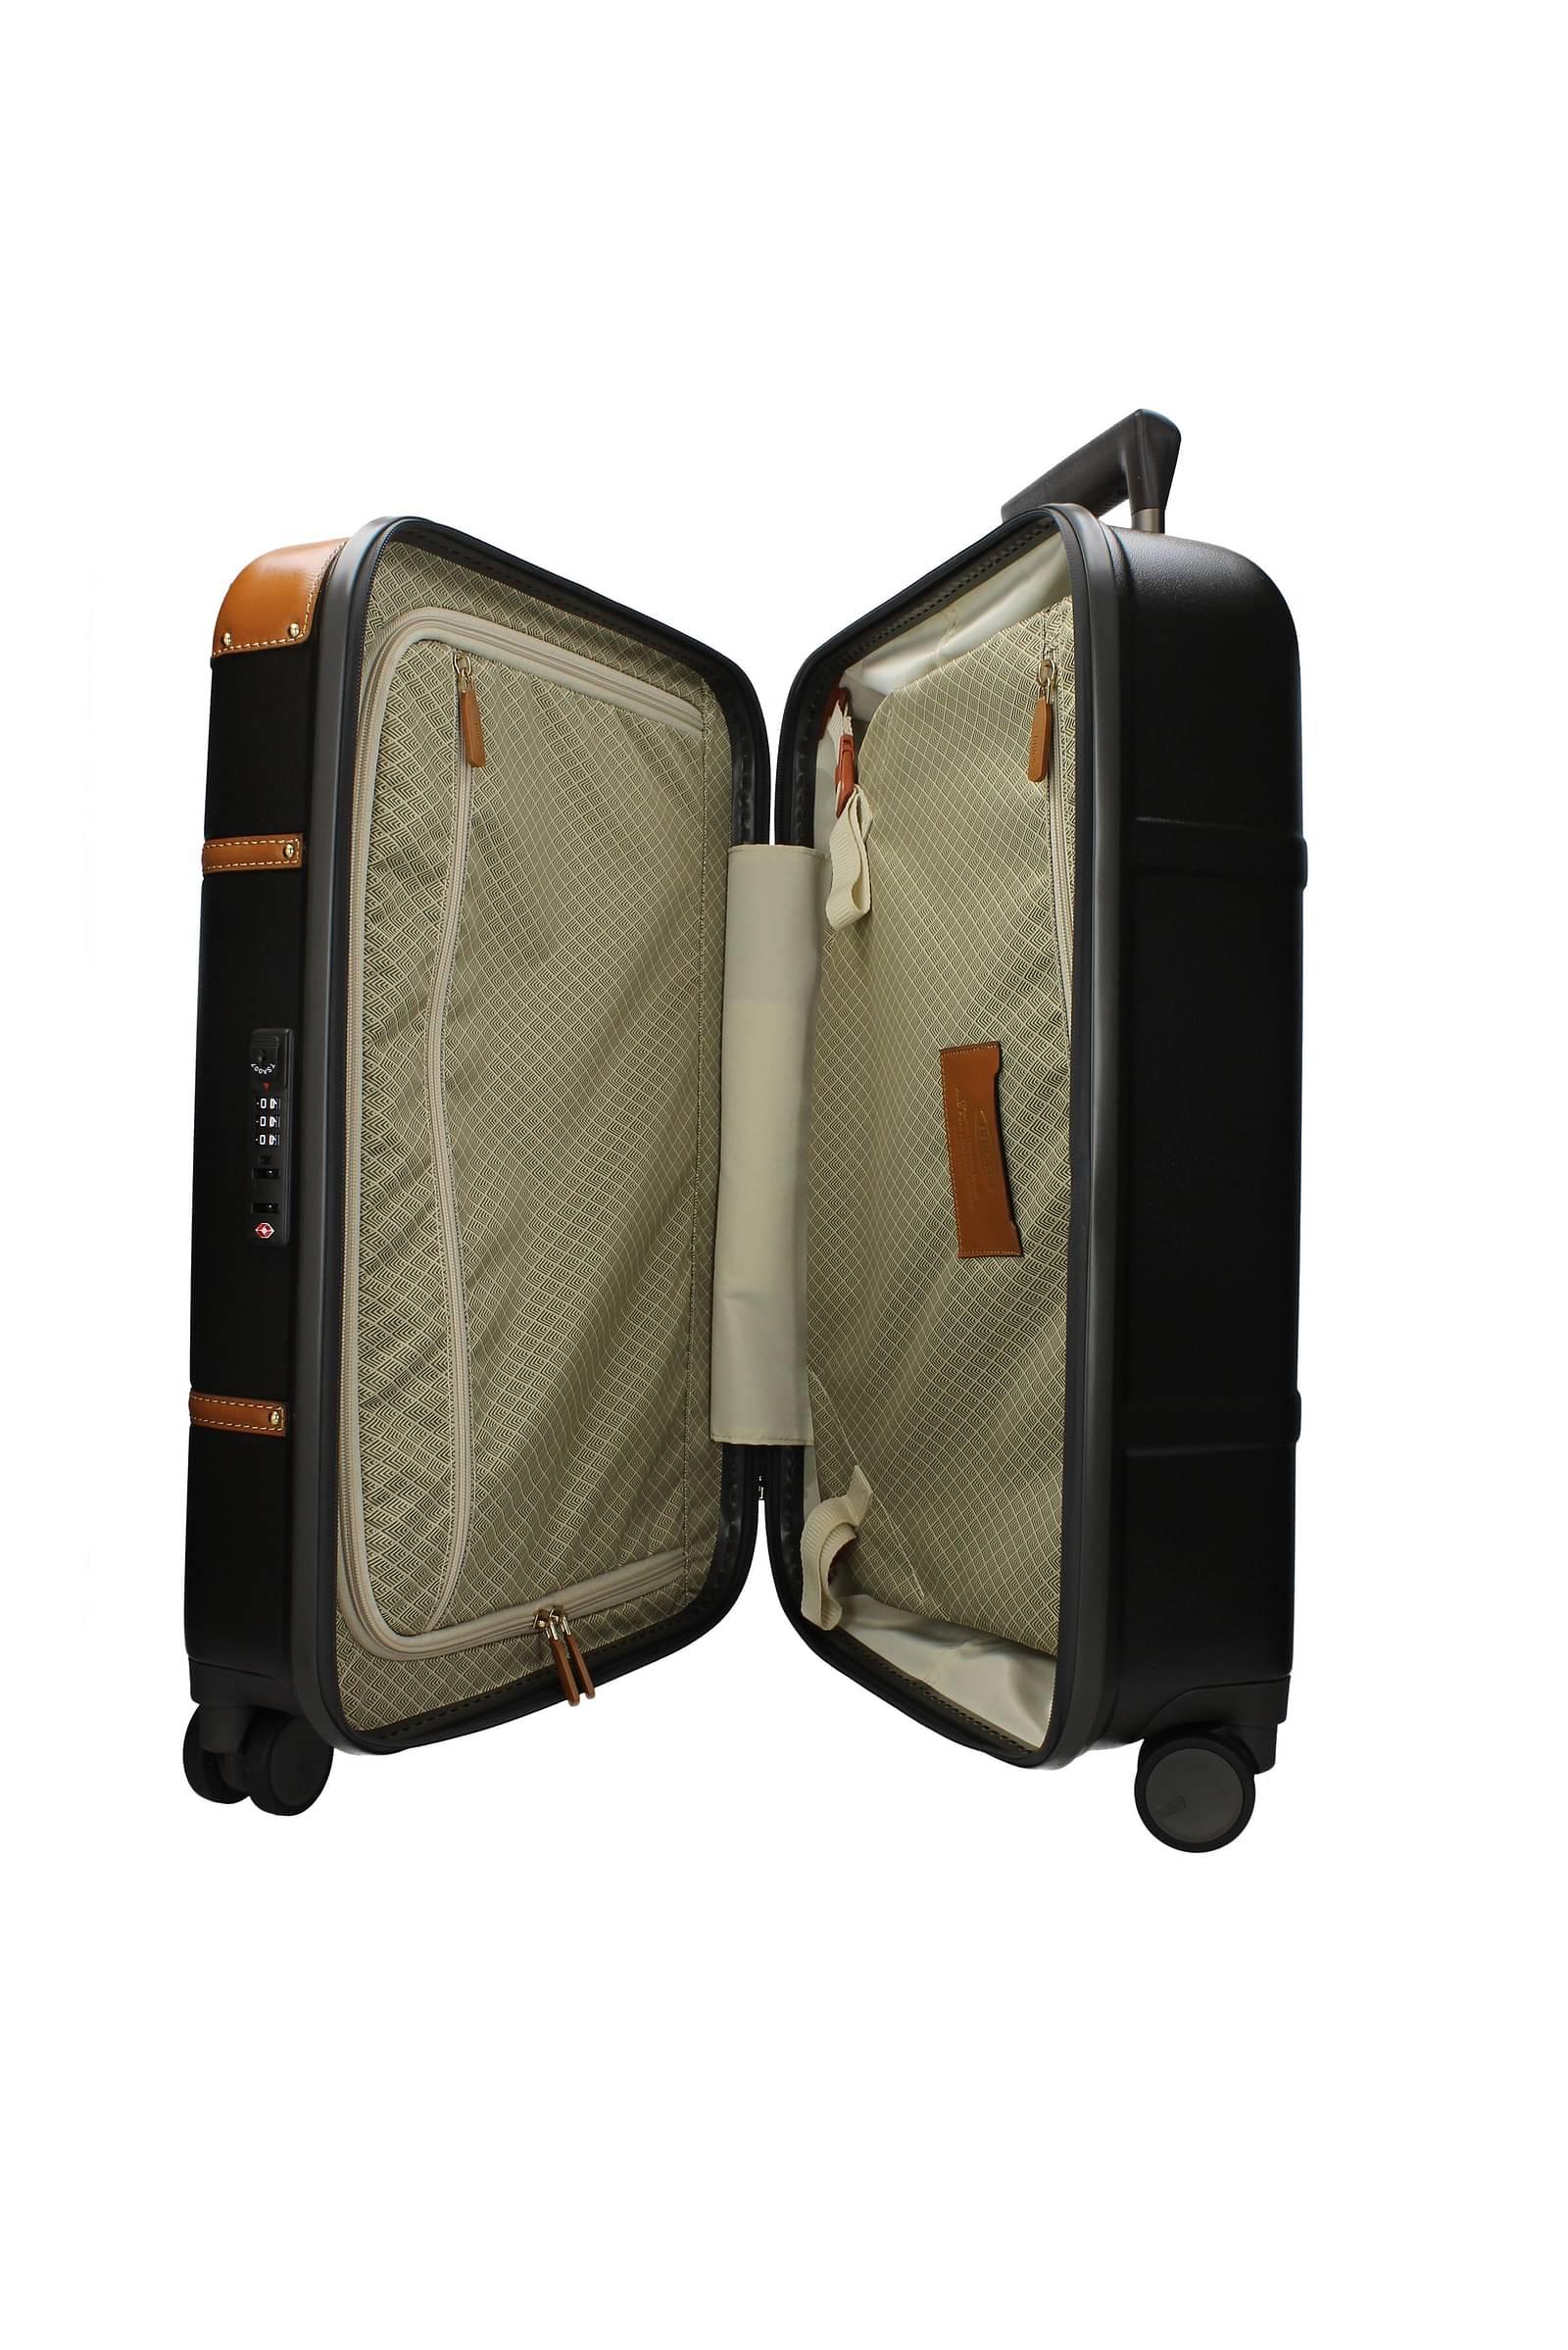  Bric's X Travel - Carry-On Luggage Bag with Spinner Wheels -  21 Inch - Luxury Luggage Bag - Olive